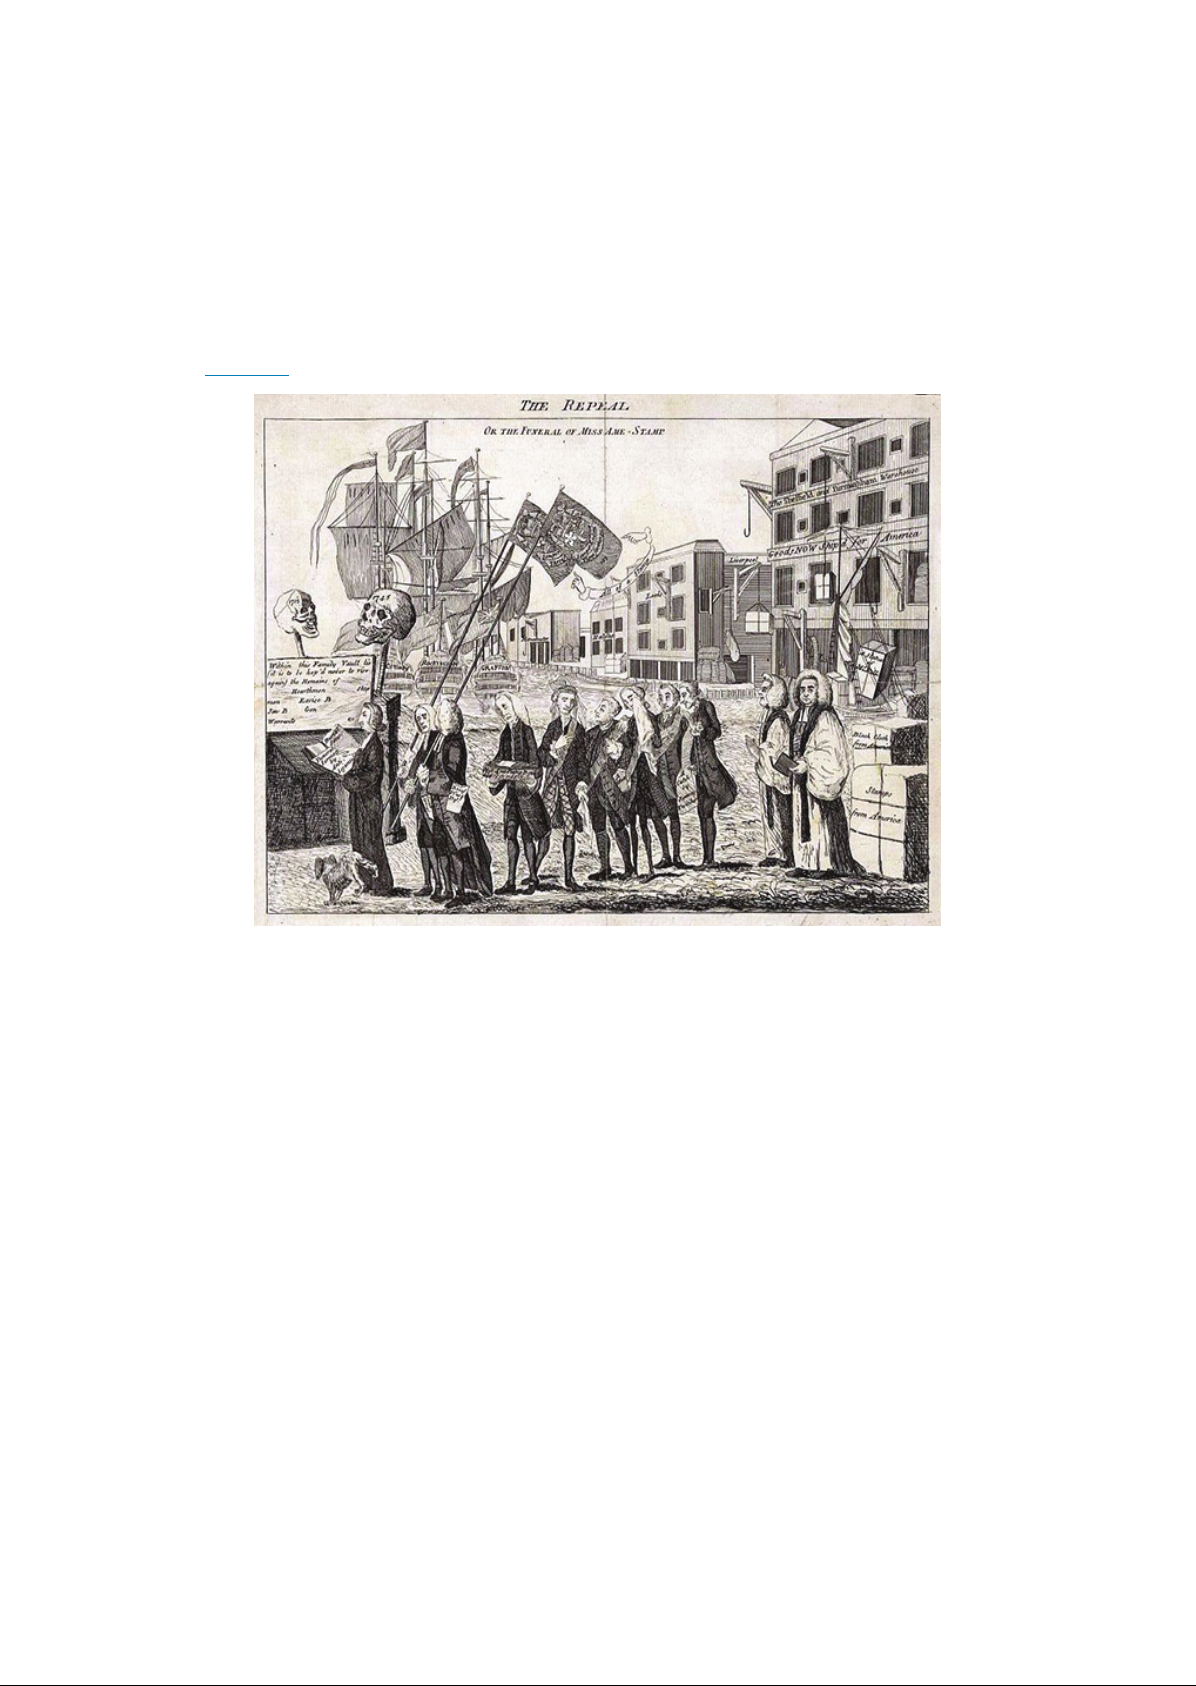 Imperial_Reforms_and_Colonial_Protests_1763-1774 Image-8